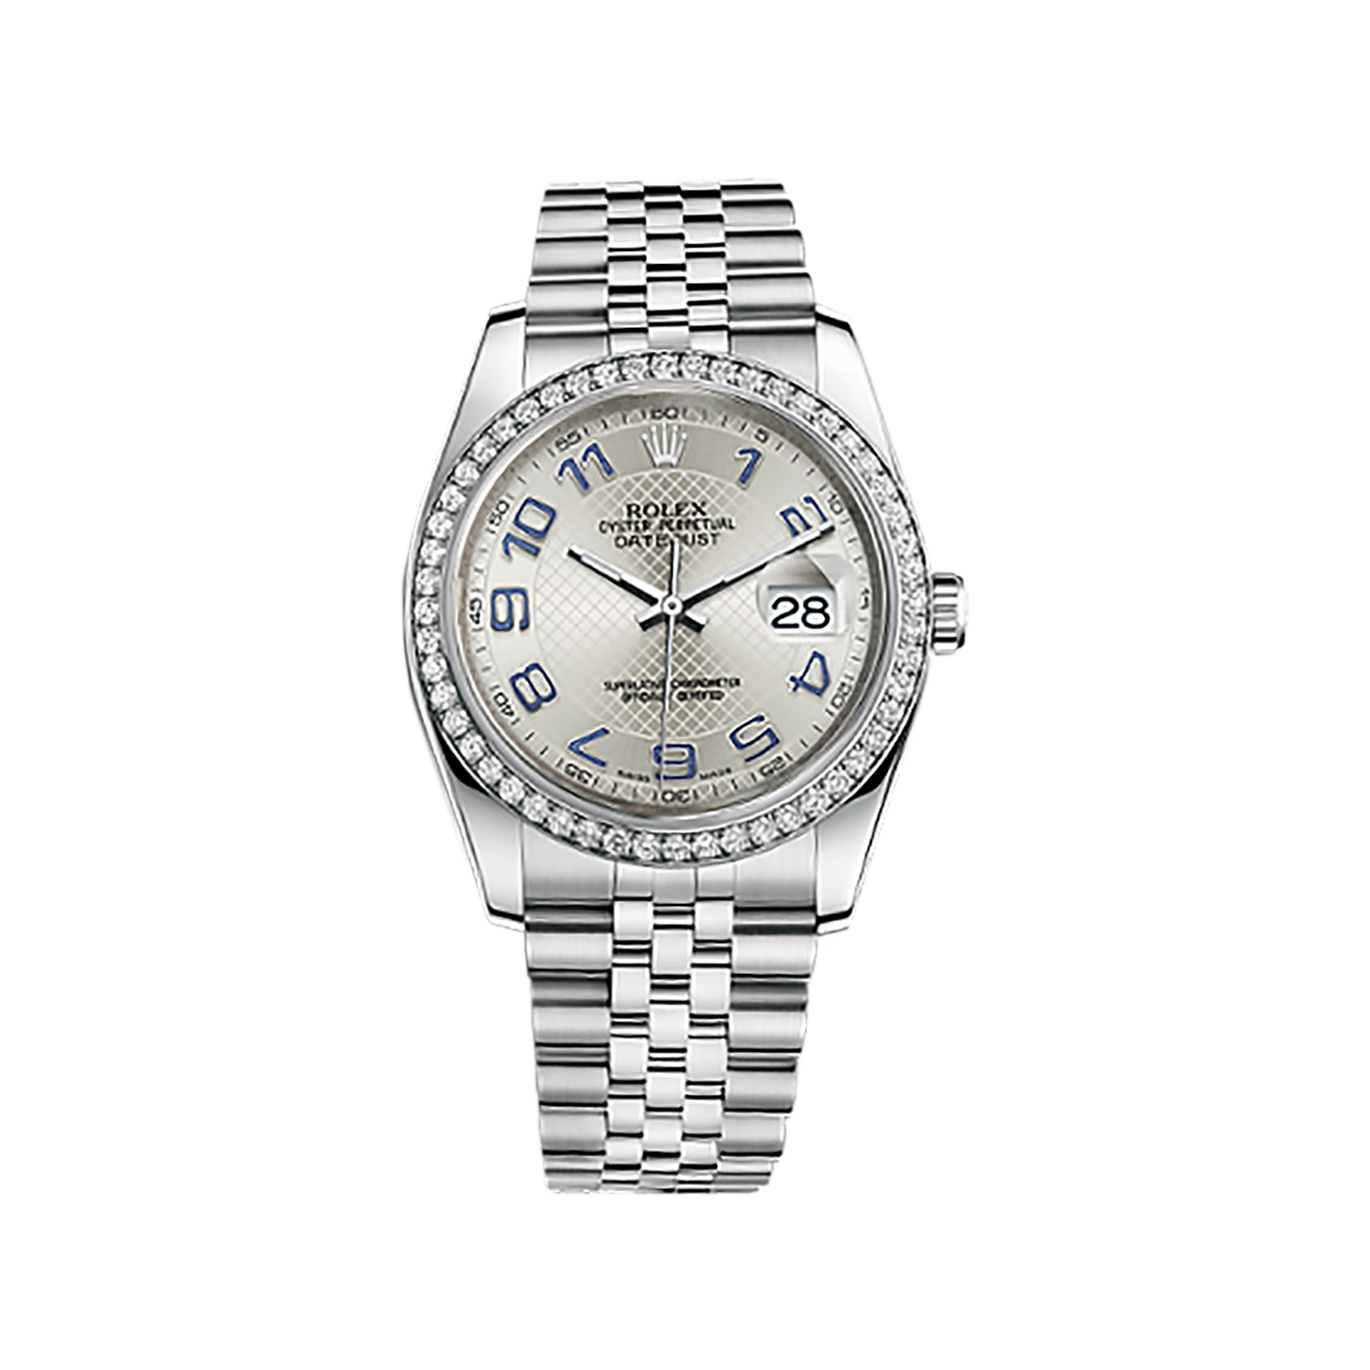 Datejust 36 116244 White Gold & Stainless Steel Watch (Silver)